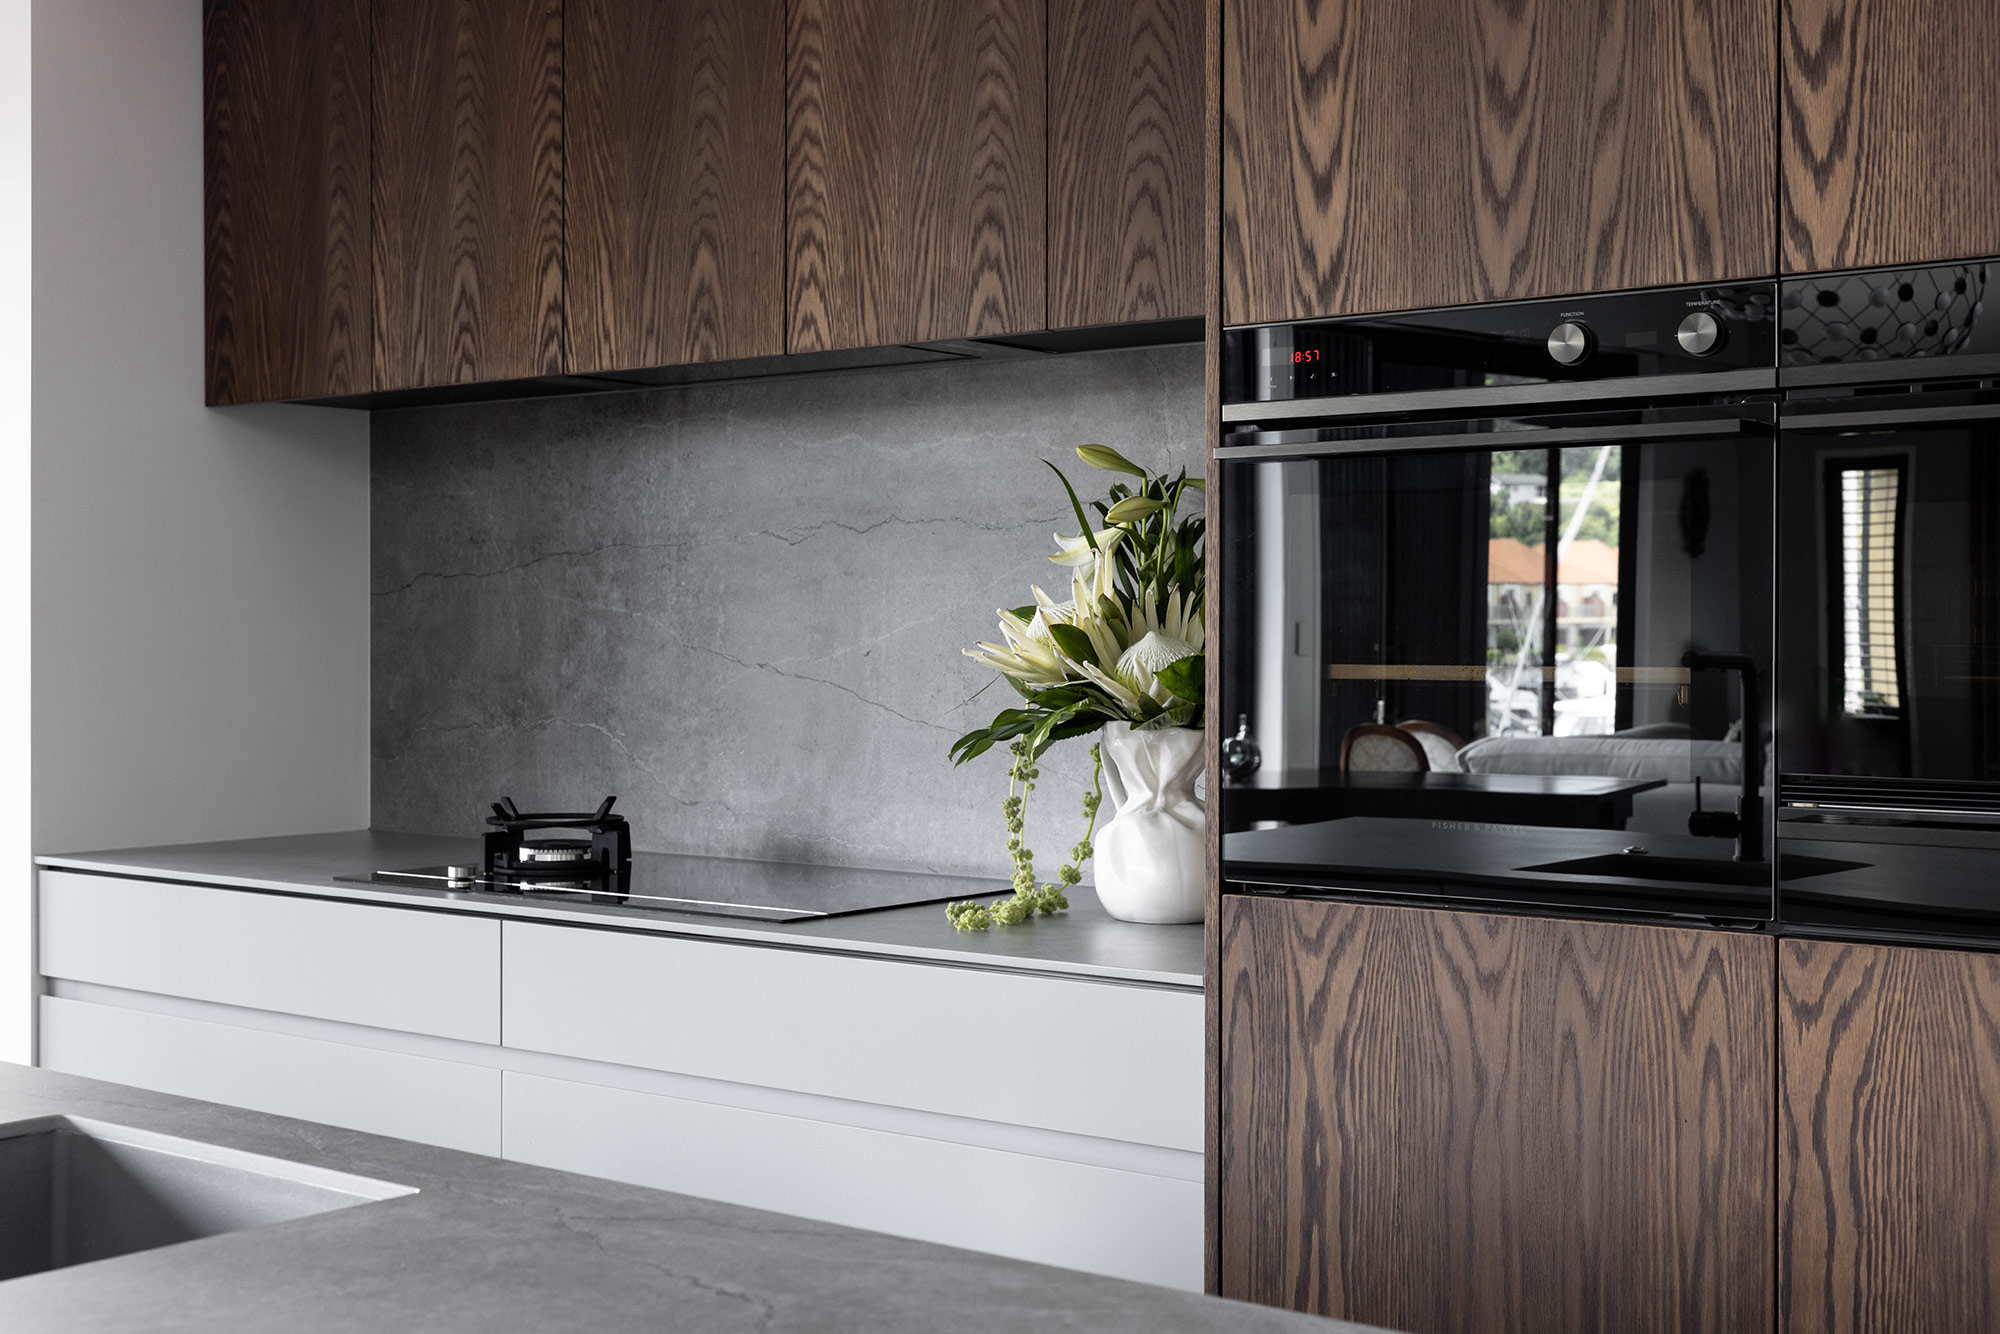 Image of Gulf Harbour 19 in Two Dekton colours to match wood in kitchens and bathrooms - Cosentino